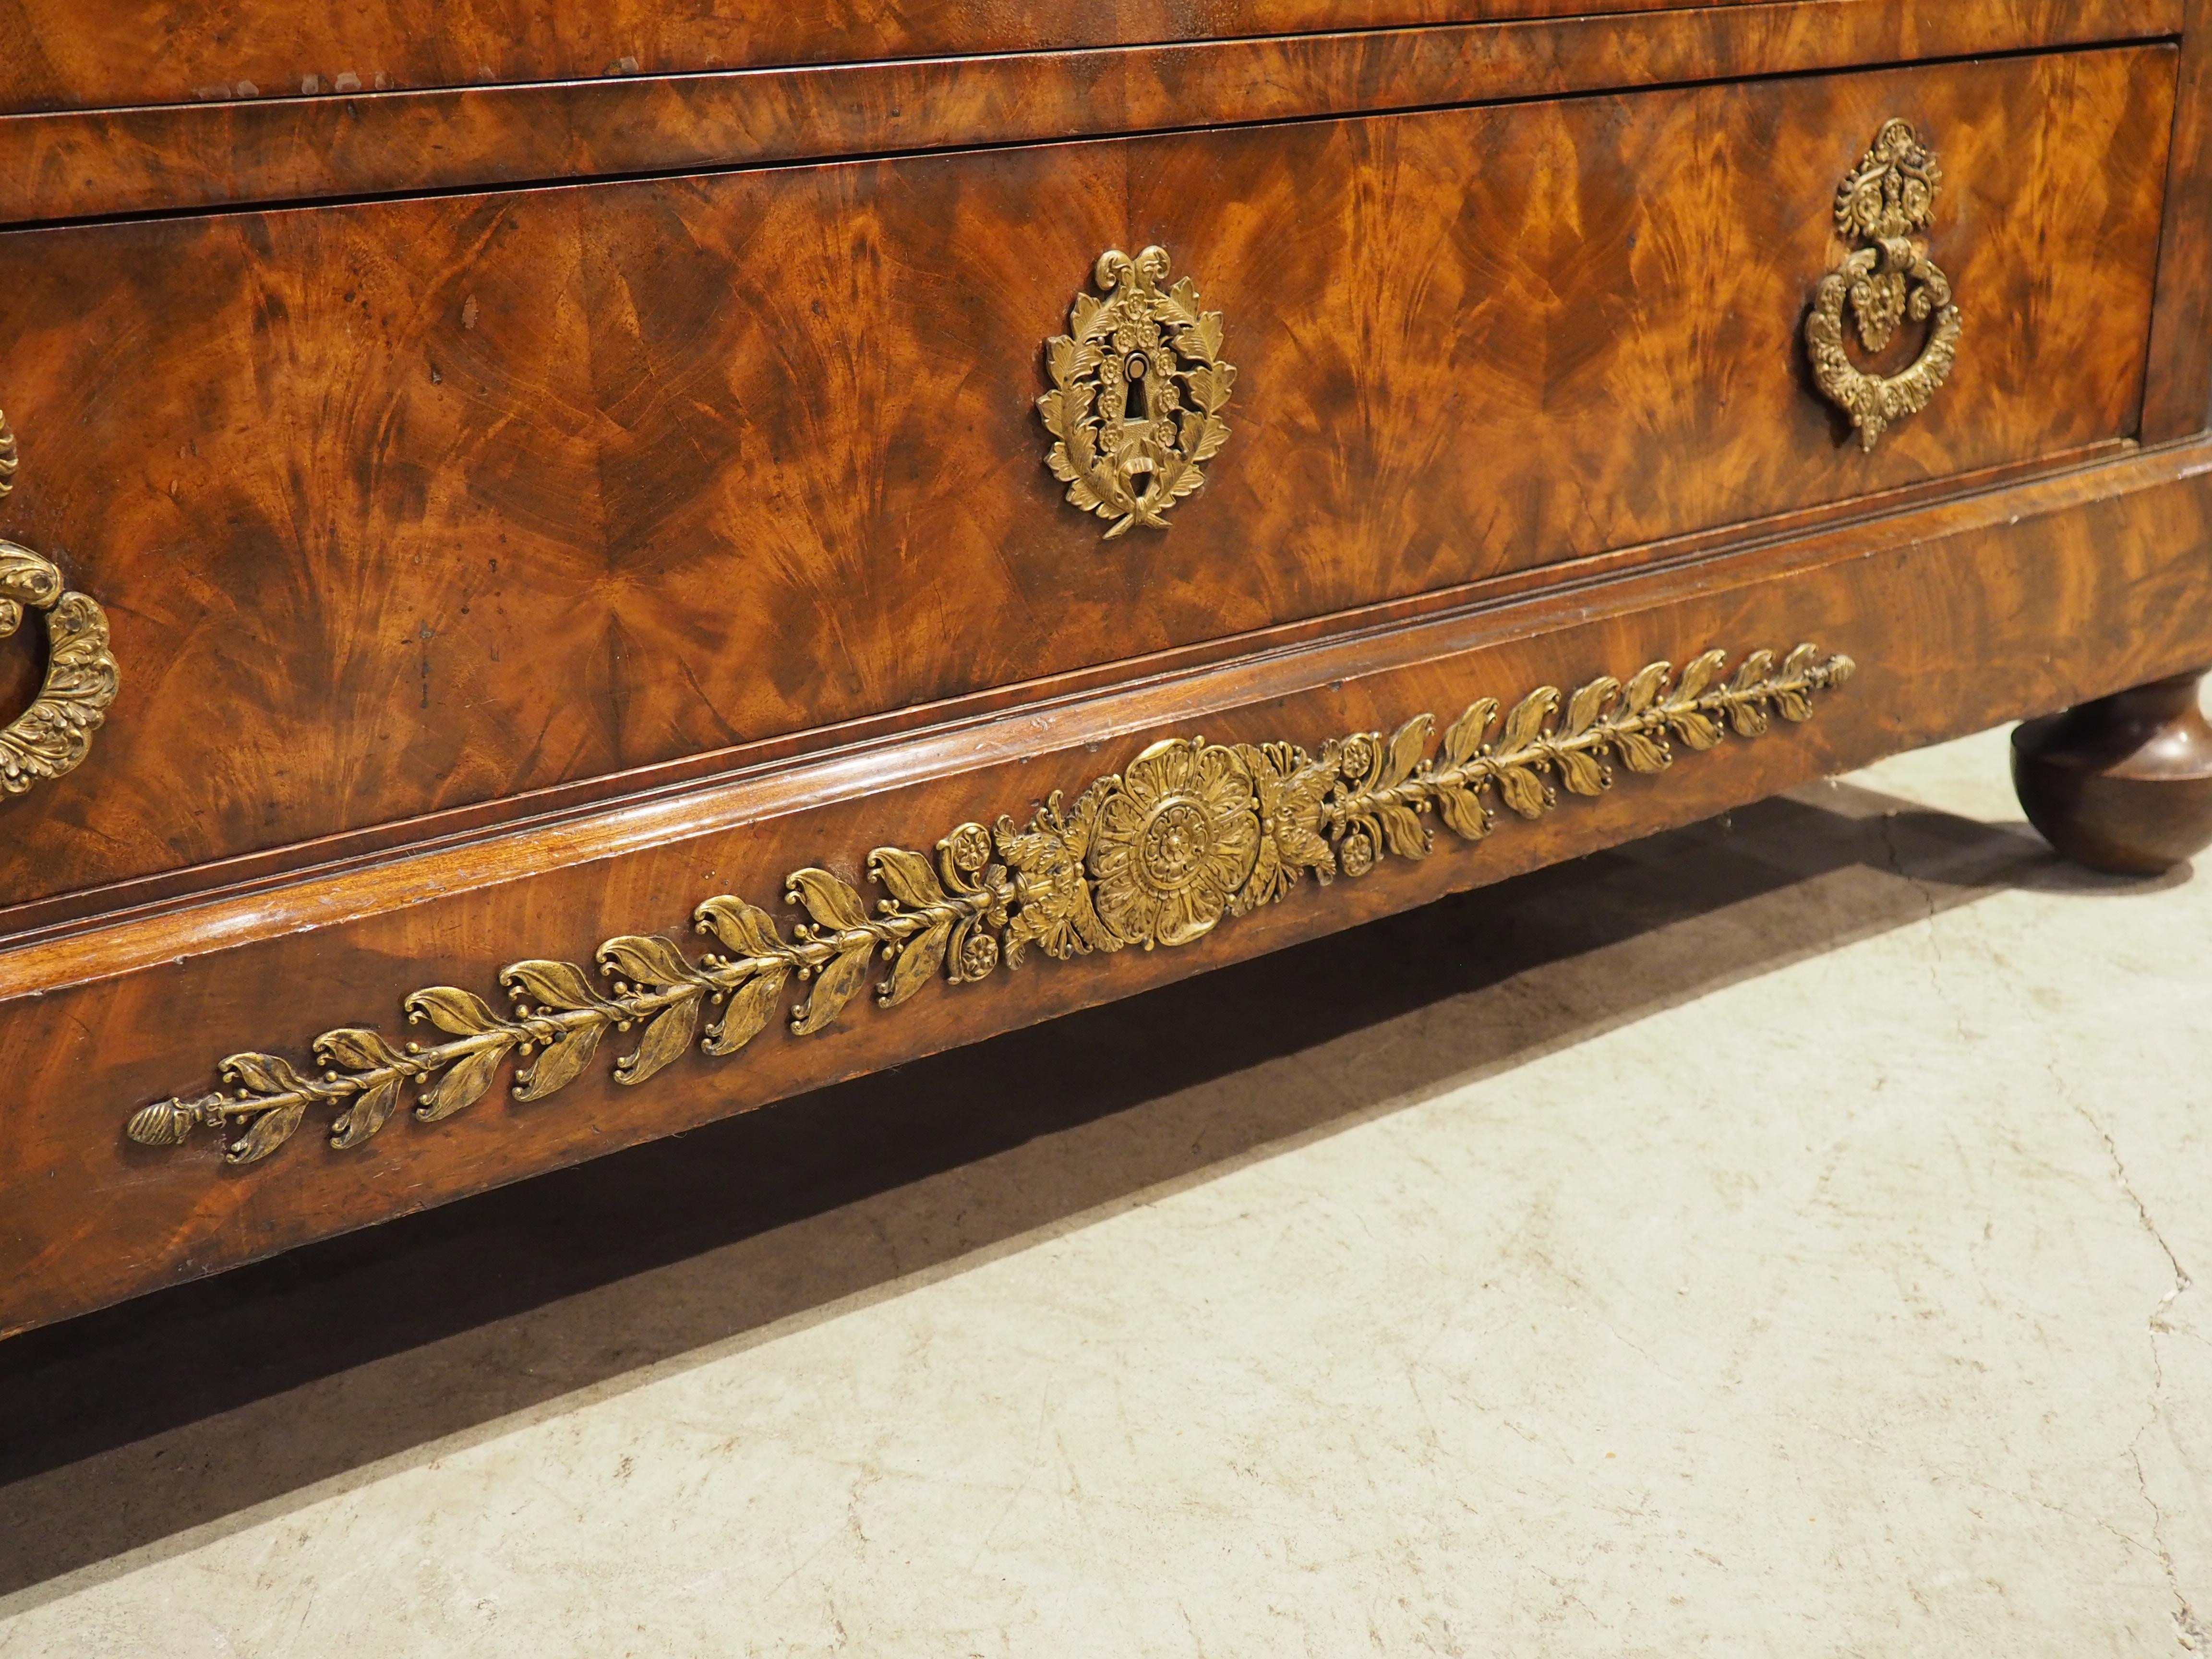 Circa 1820 French Restauration Commode in Flame Mahogany, Gilt Bronze Hardware For Sale 9